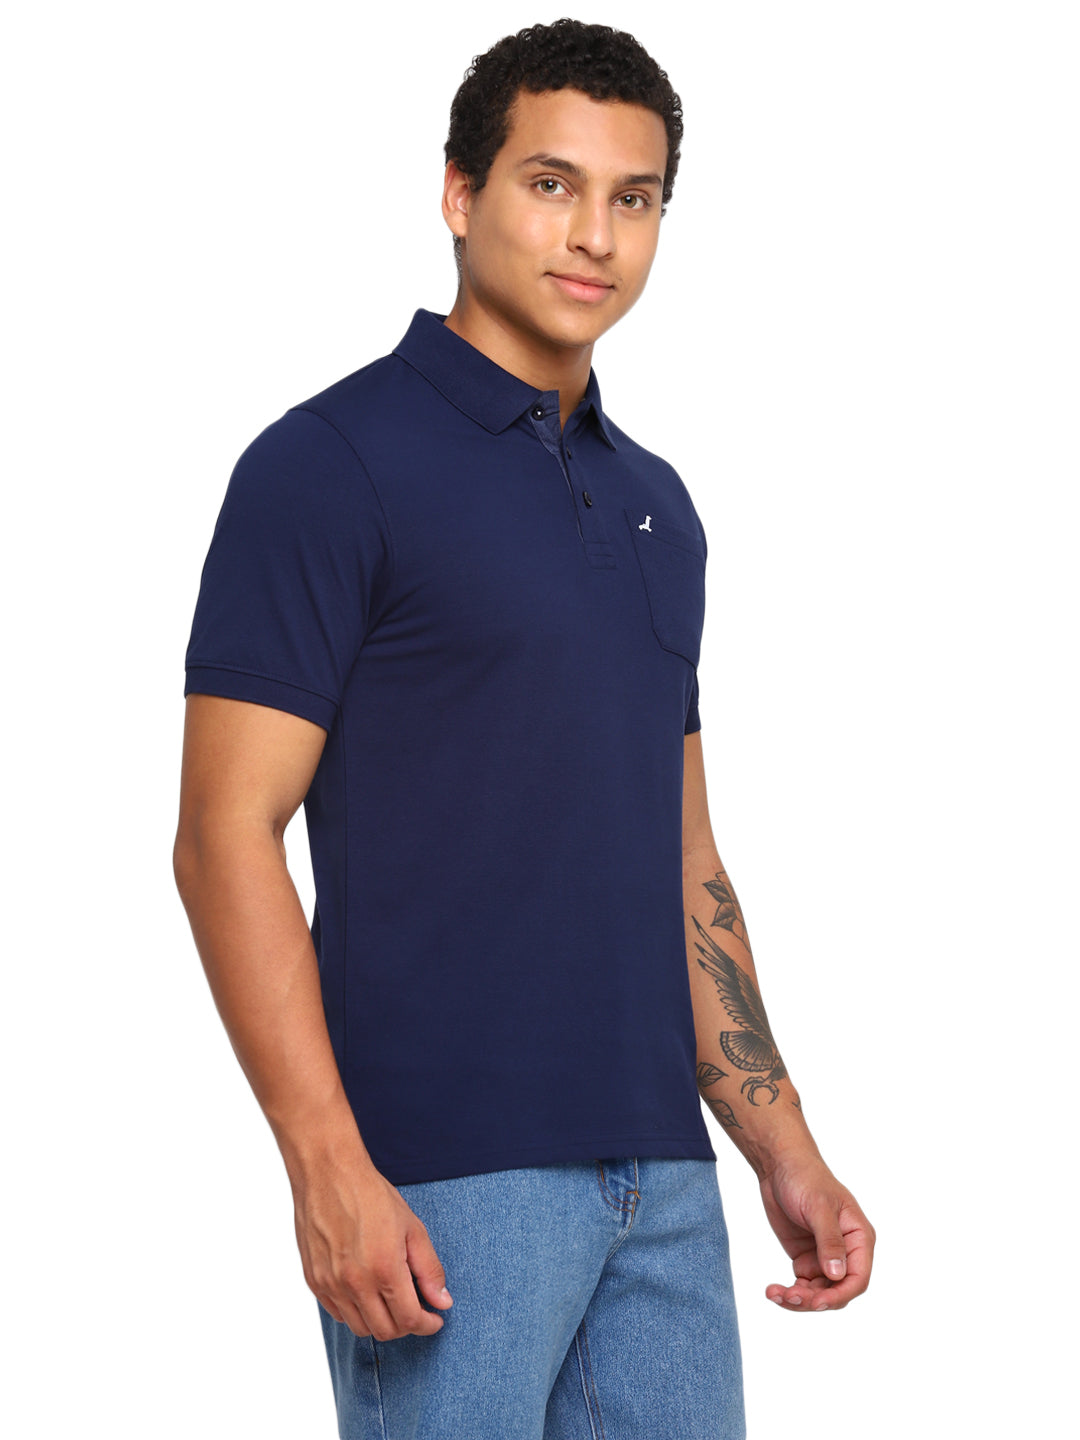 Polo Collar T-Shirt for Men with Pocket - Navy Blue